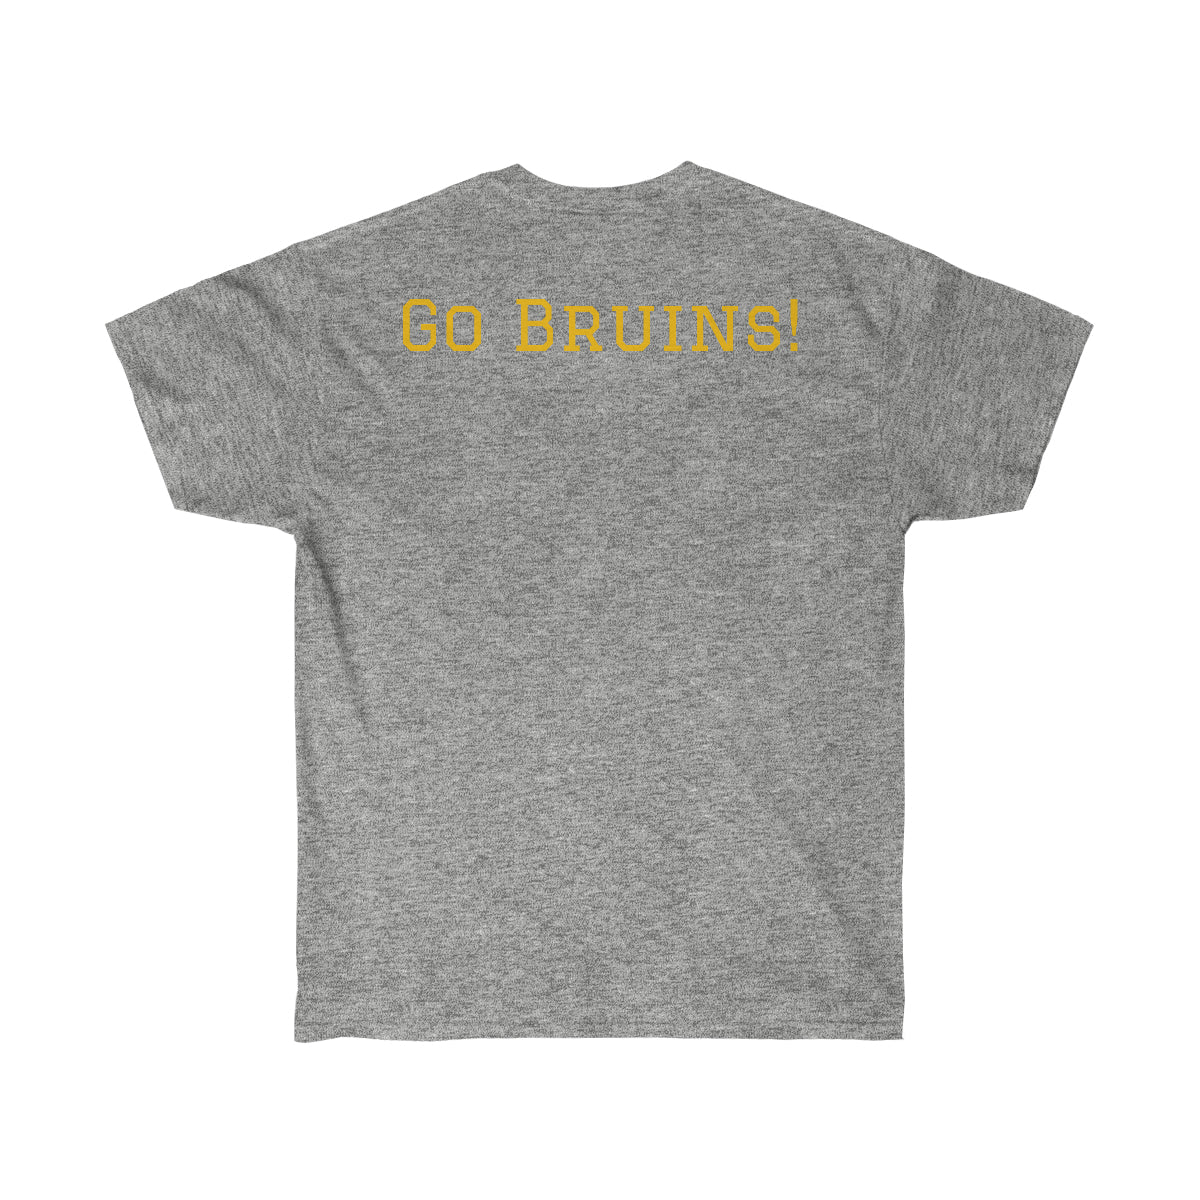 Sleuth of Bruins College T-shirt